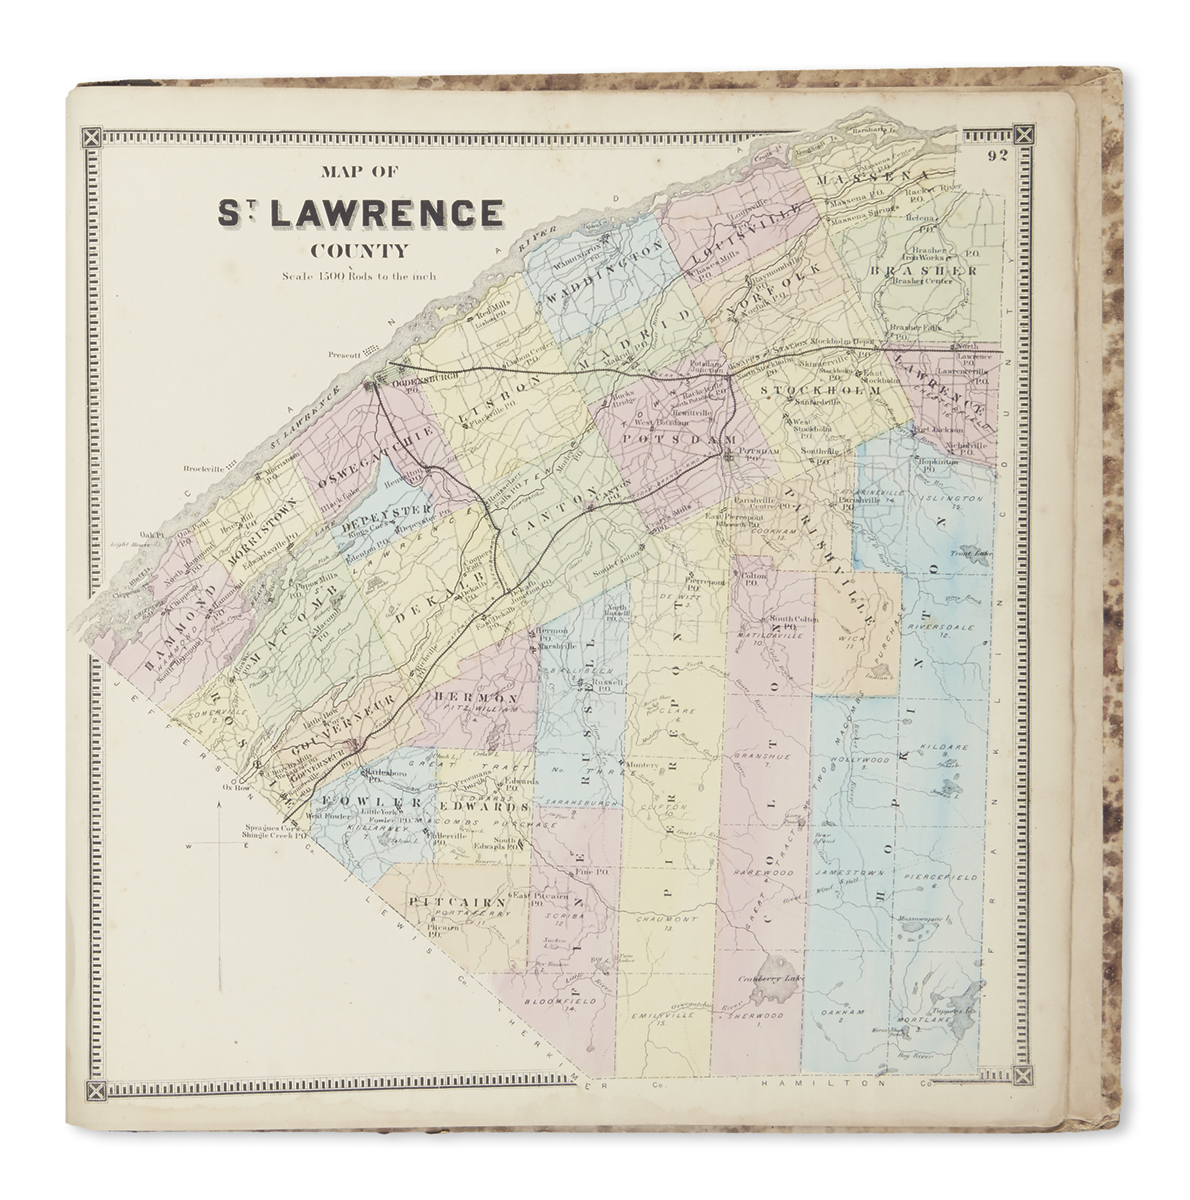 (NEW YORK -- UPSTATE.) Beers, S.N. & D.G. New Topographical Atlas of St. Lawrence Co., New York.